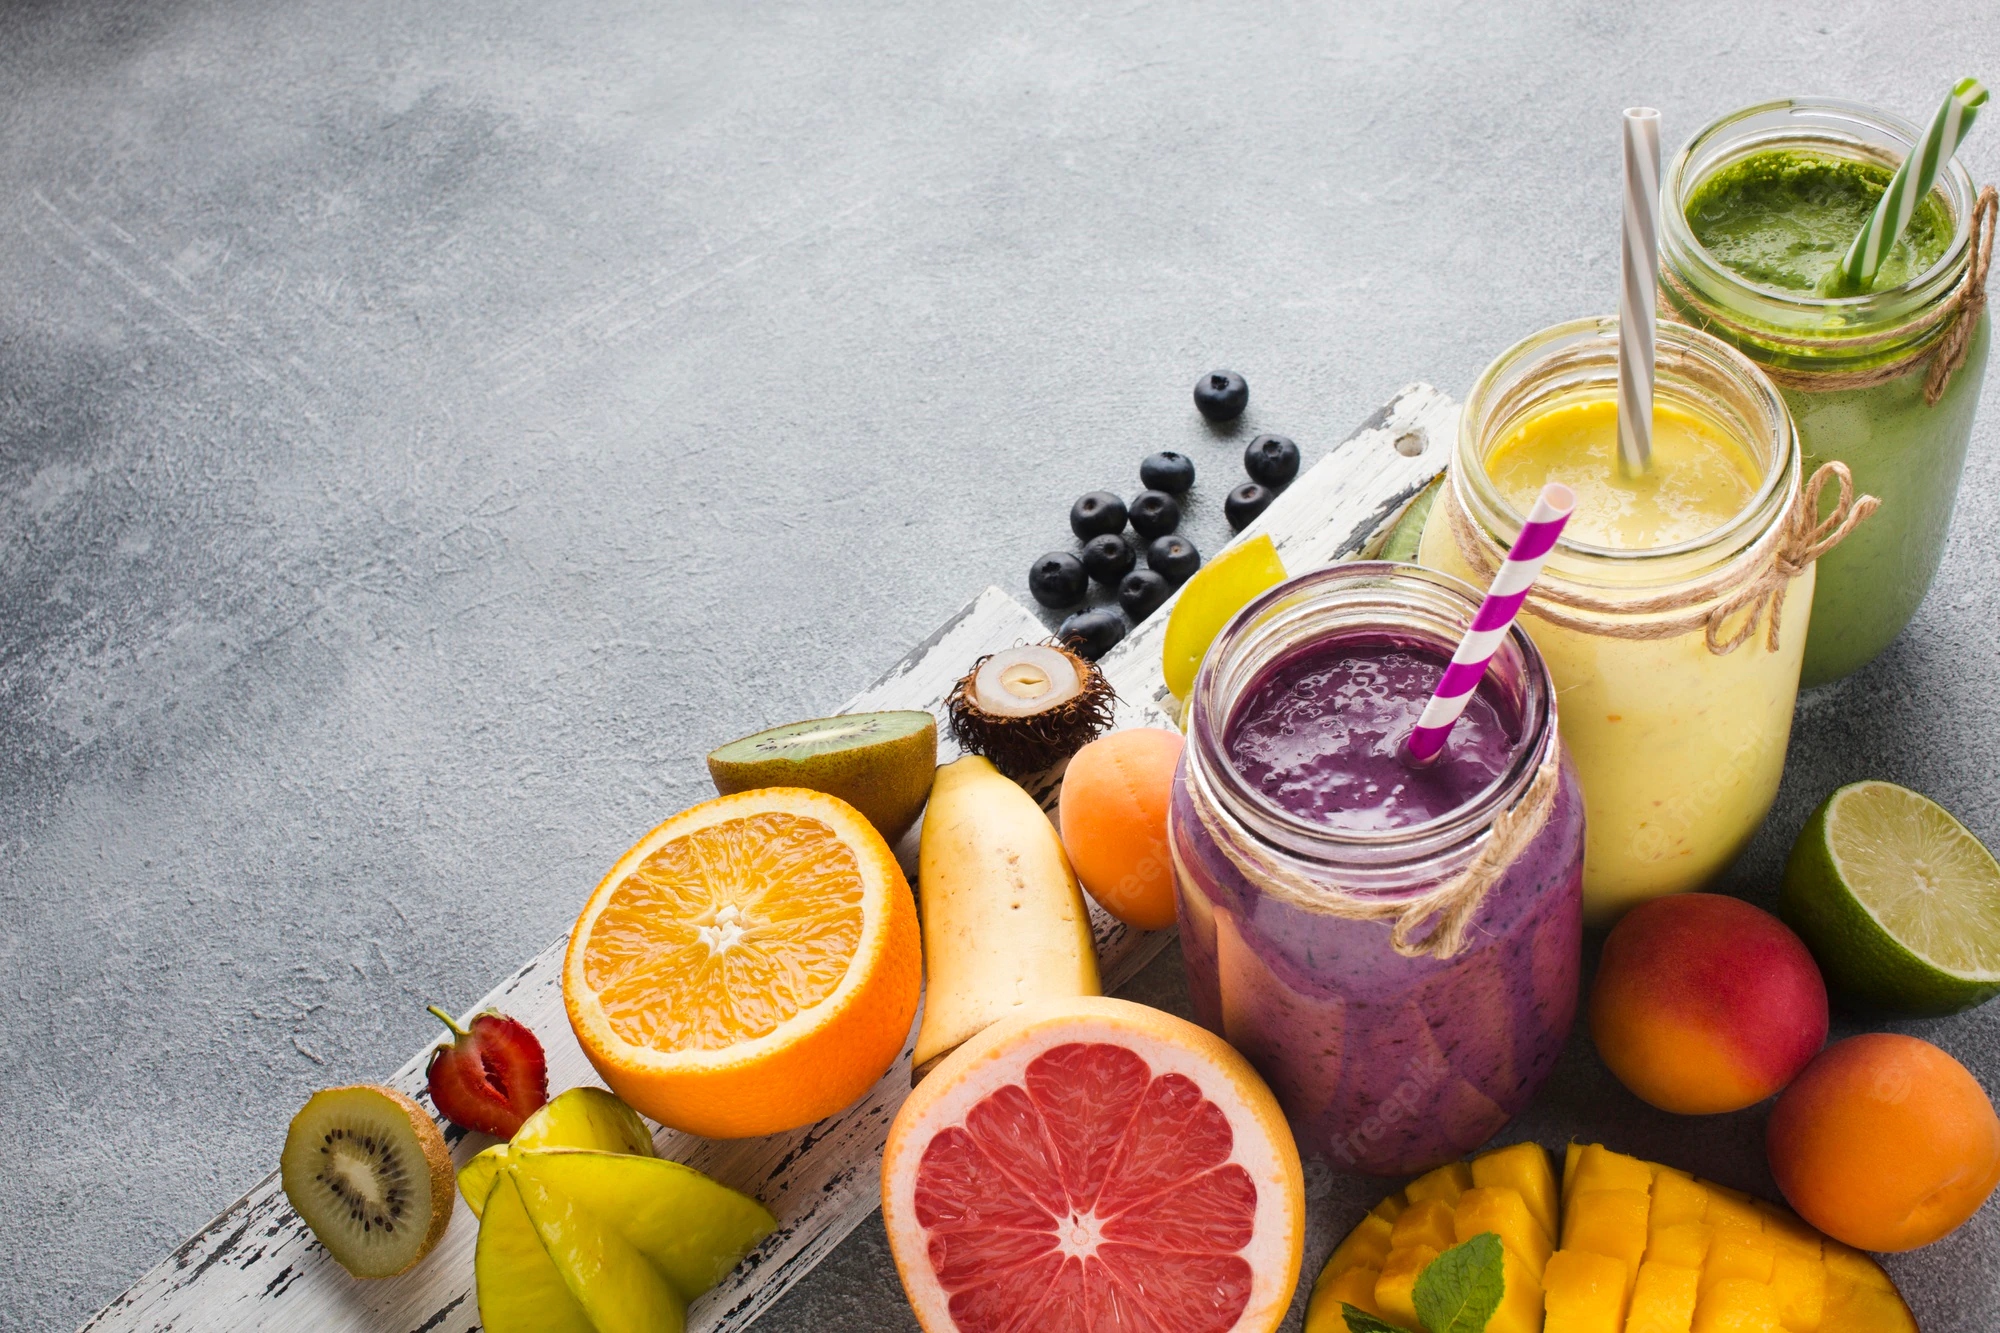 Purple smoothie, yellow smoothie and green smoothie in glass jars with fruits placed on a grey surface